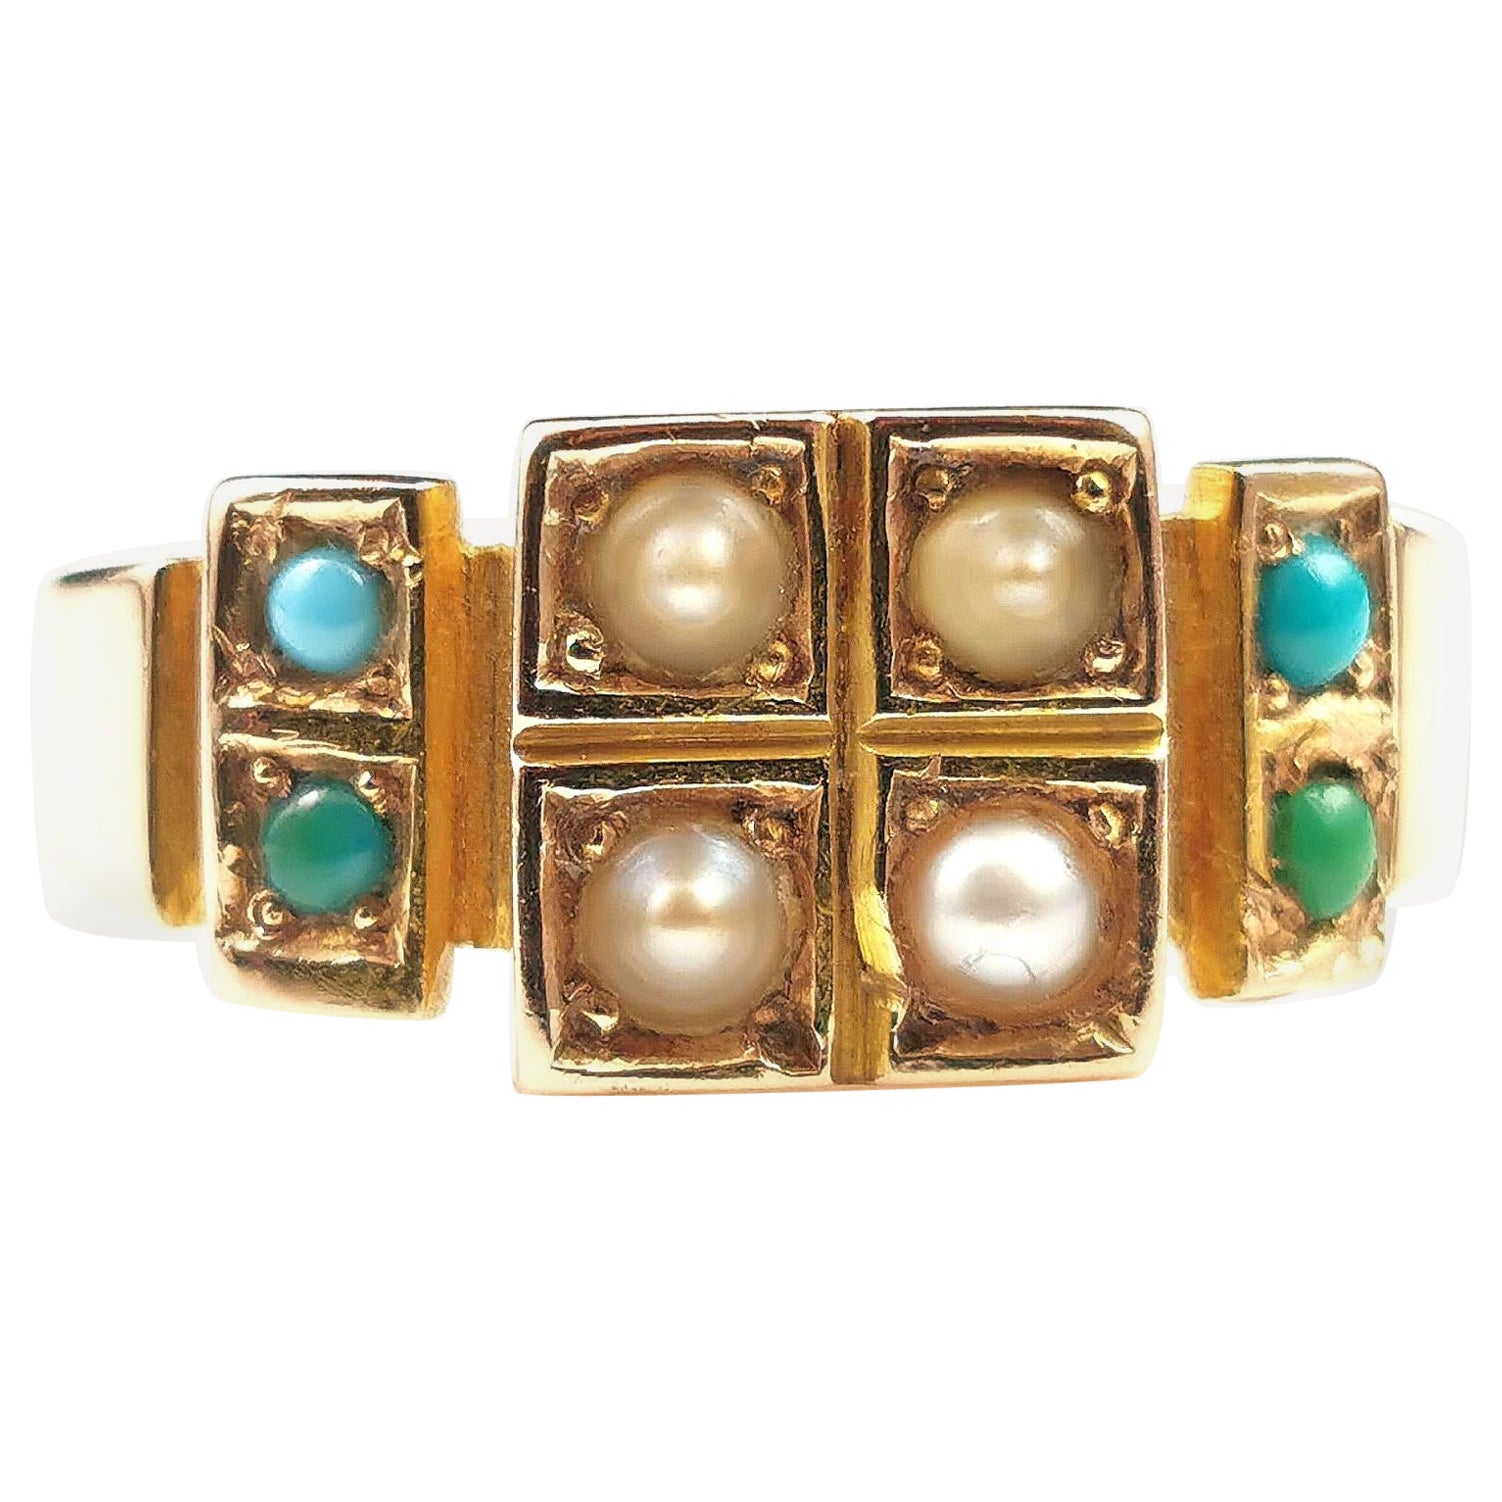 Antique Pearl and Turquoise Ring 15k Yellow Gold, Victorian